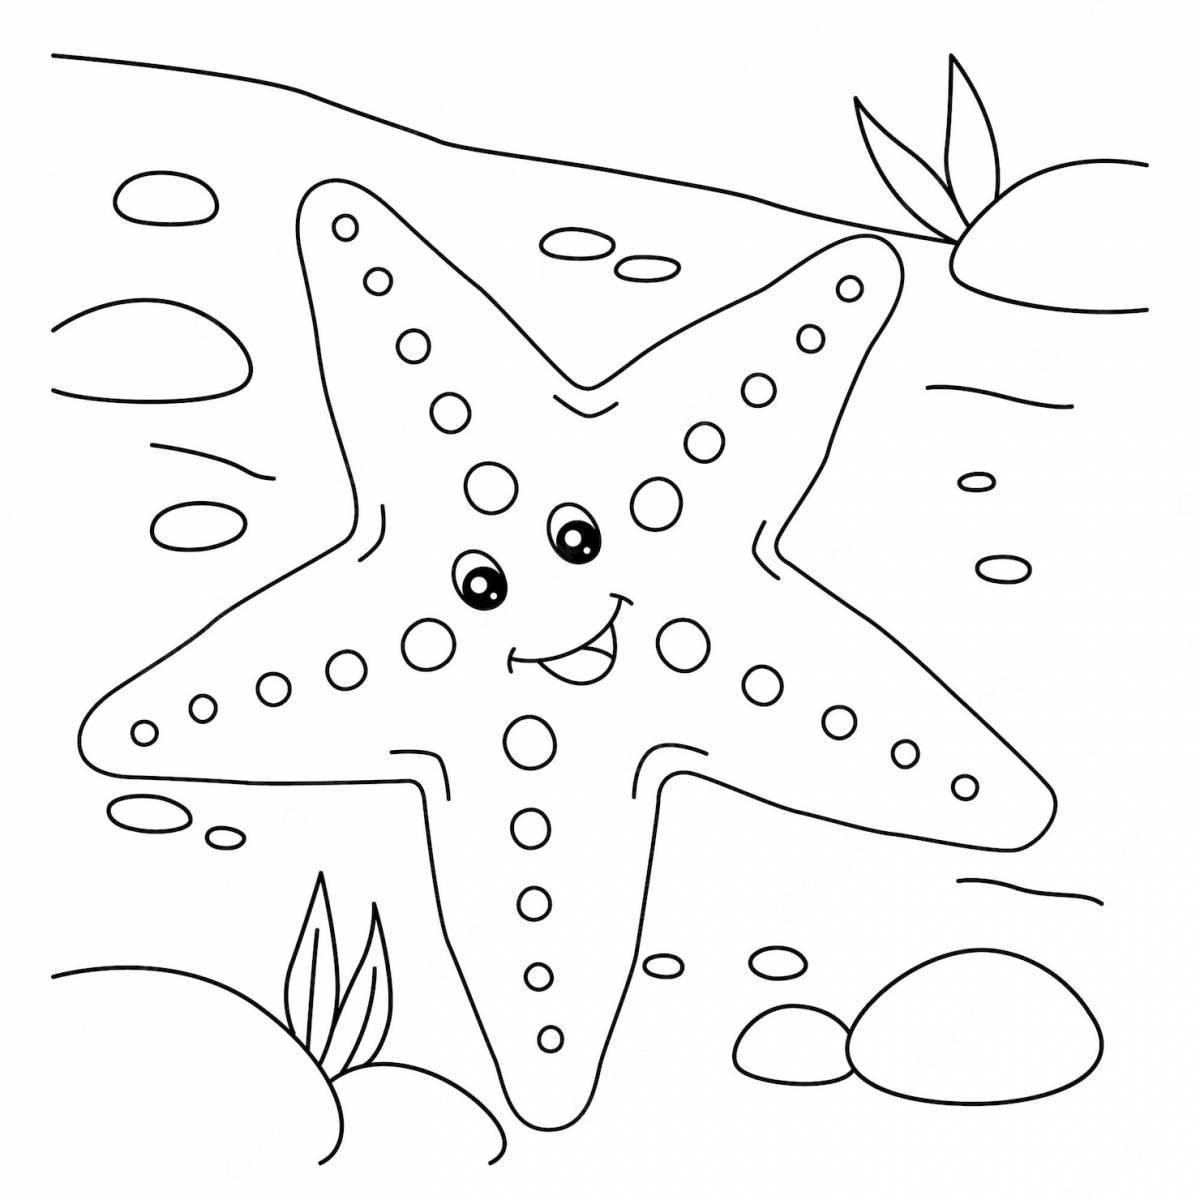 Bright starfish coloring book for kids